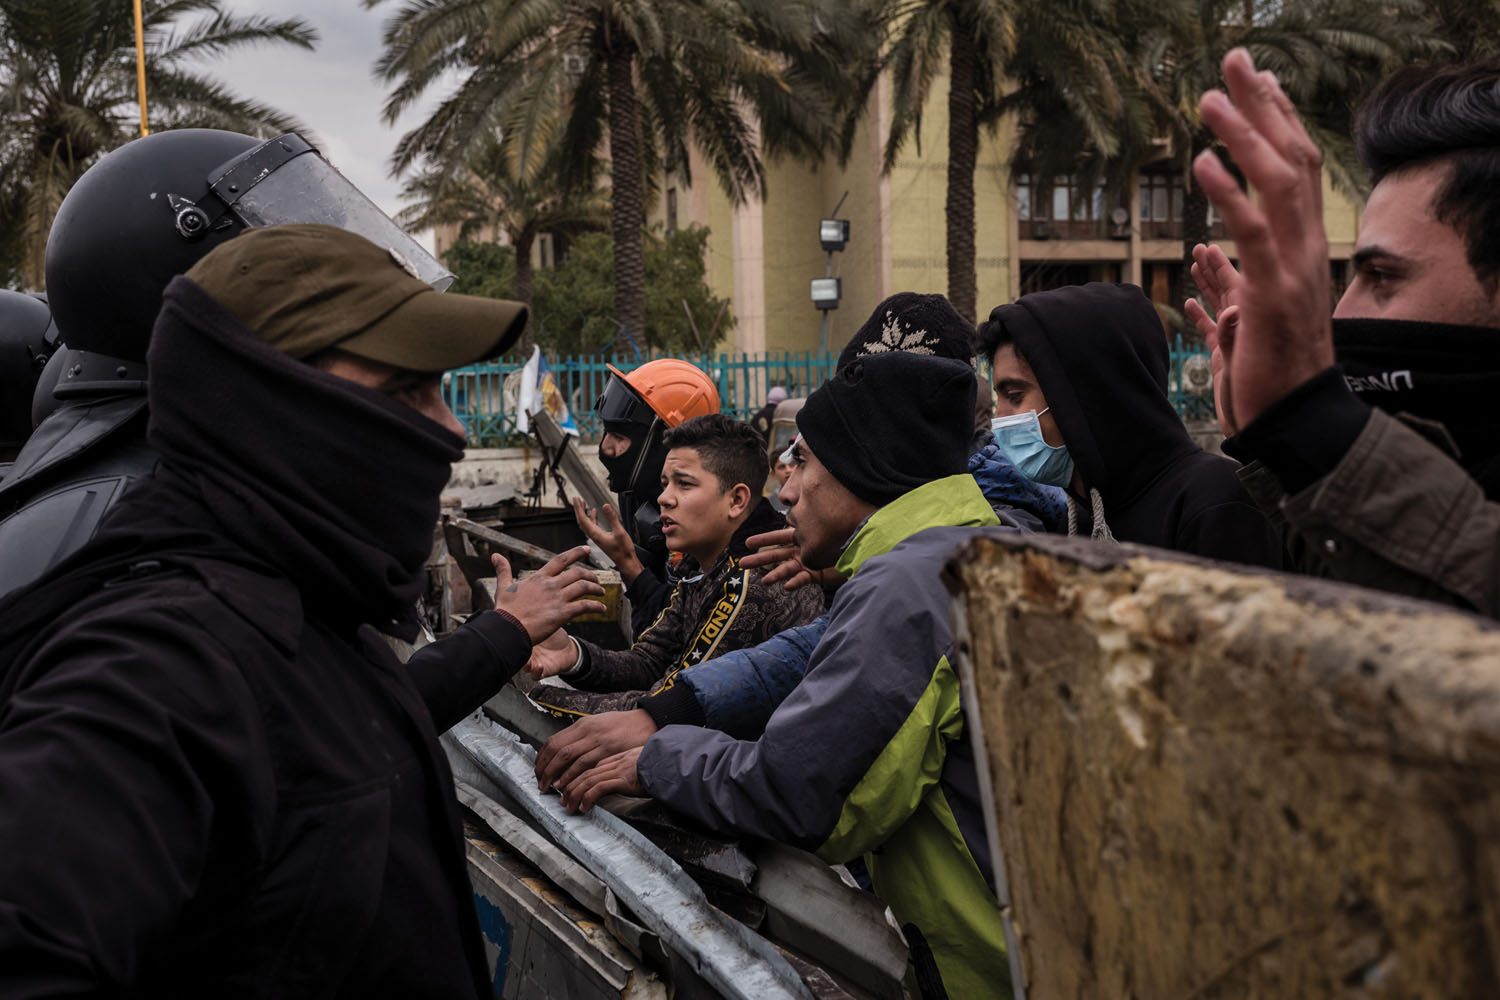 Protesters and security forces in Tahrir Square.